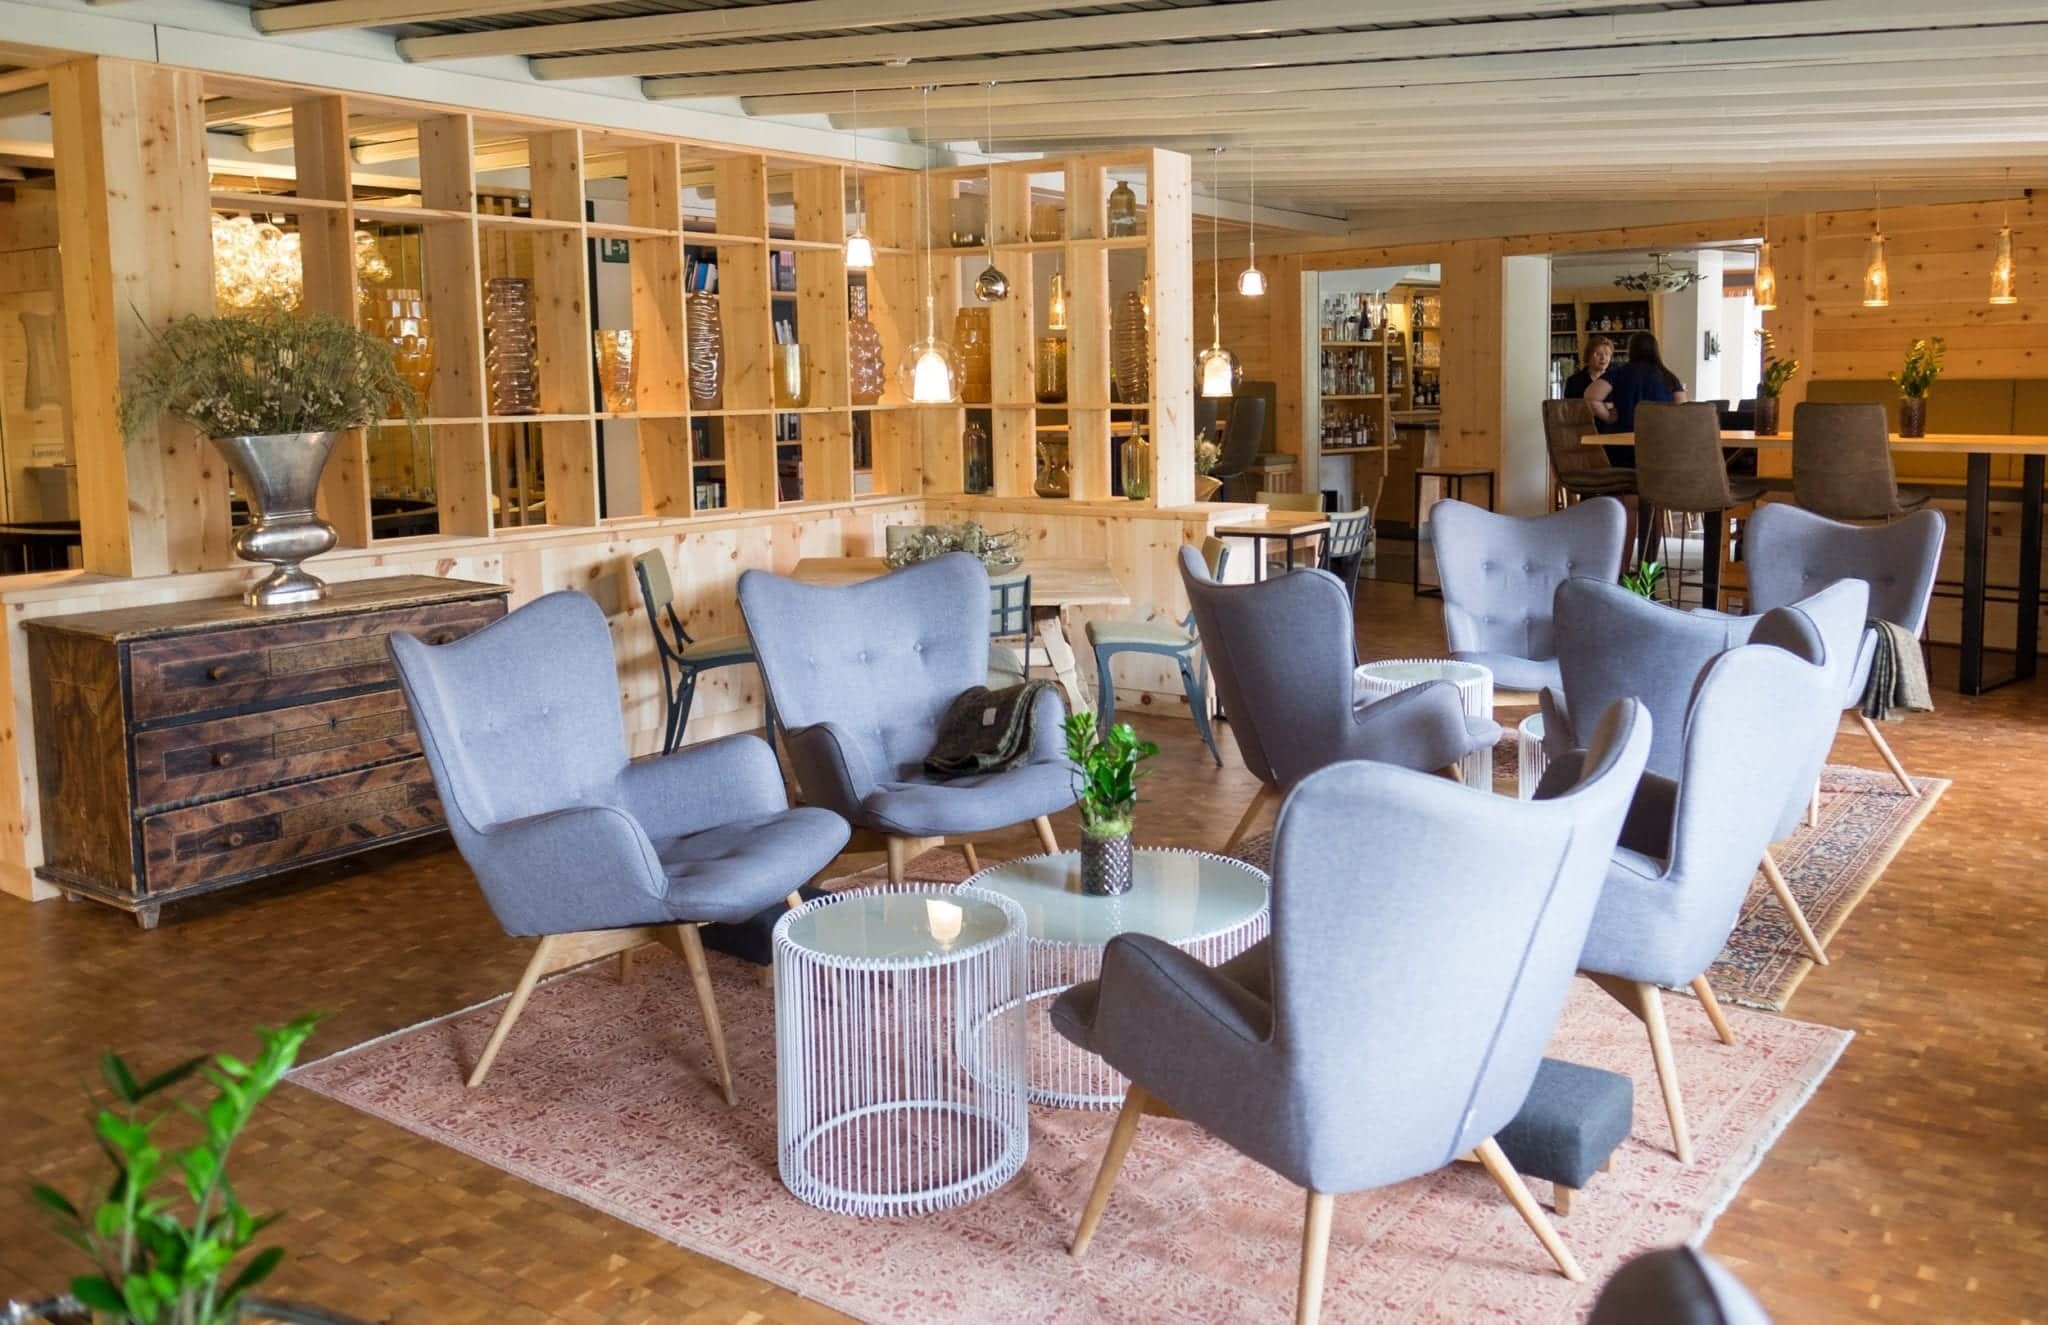 A hotel lobby mixing traditional wooden walls with gray mid-century modern chairs and cage-like metal coffee tables.